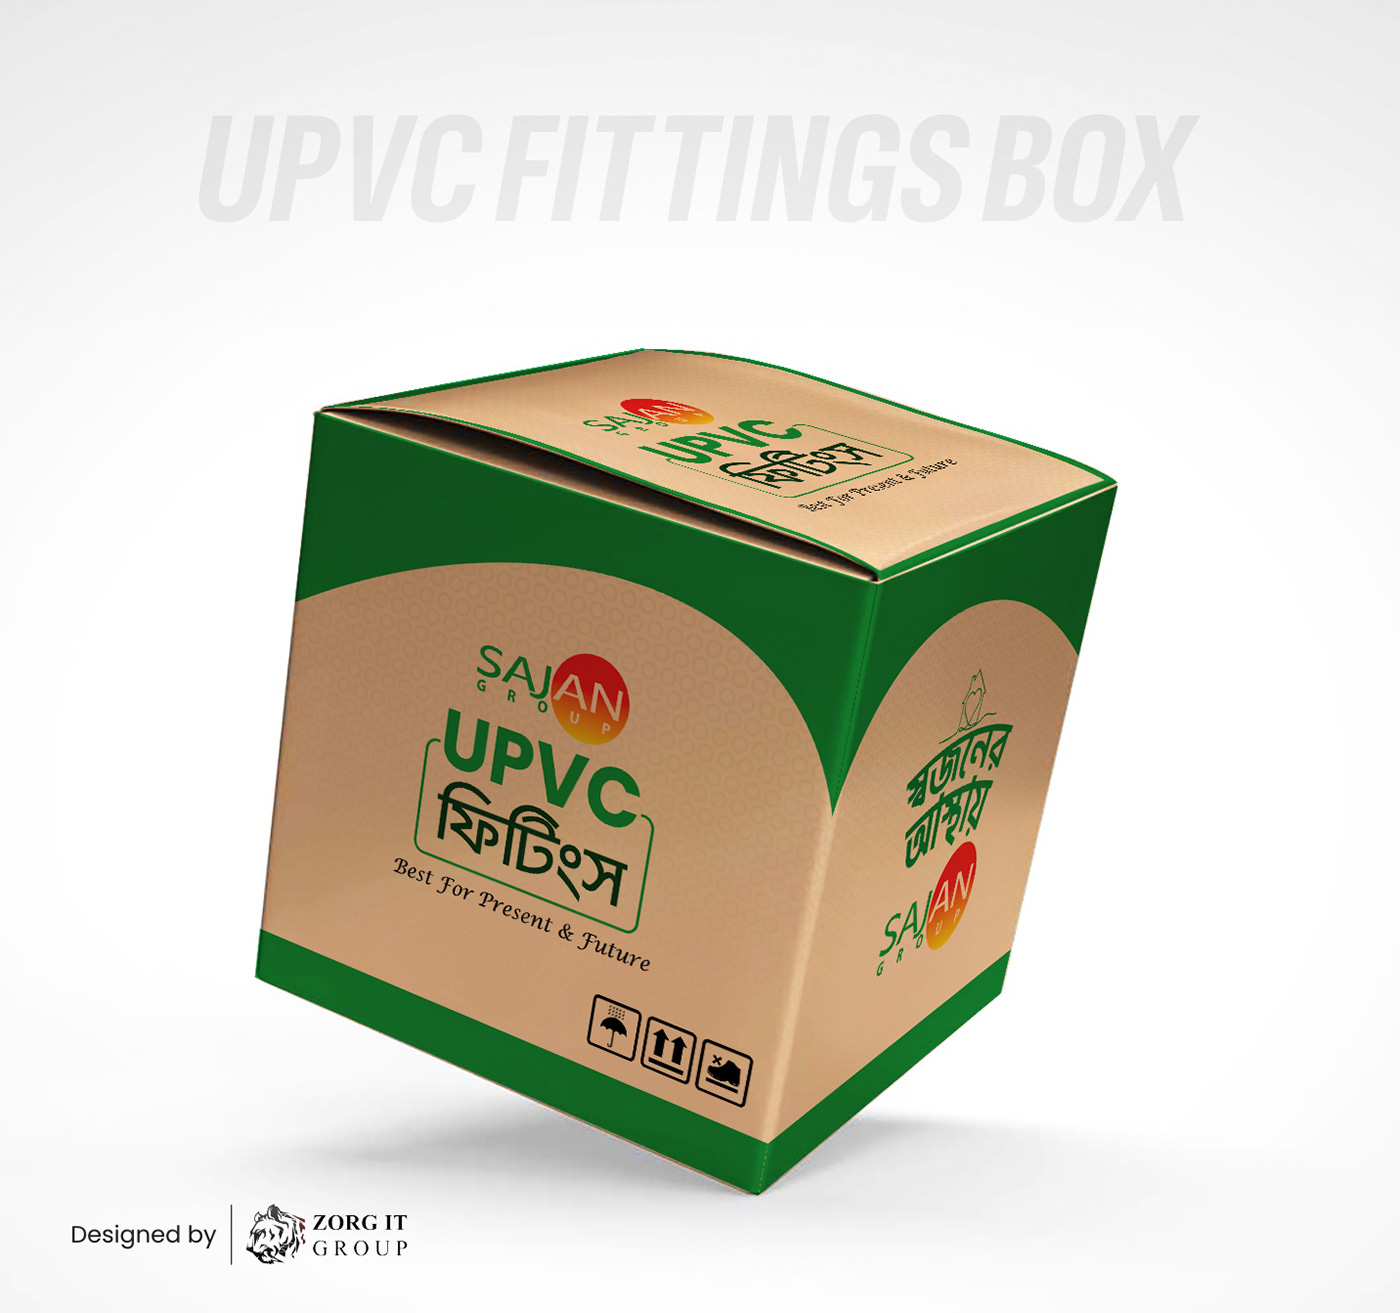 Box Design by Zorg IT Group.